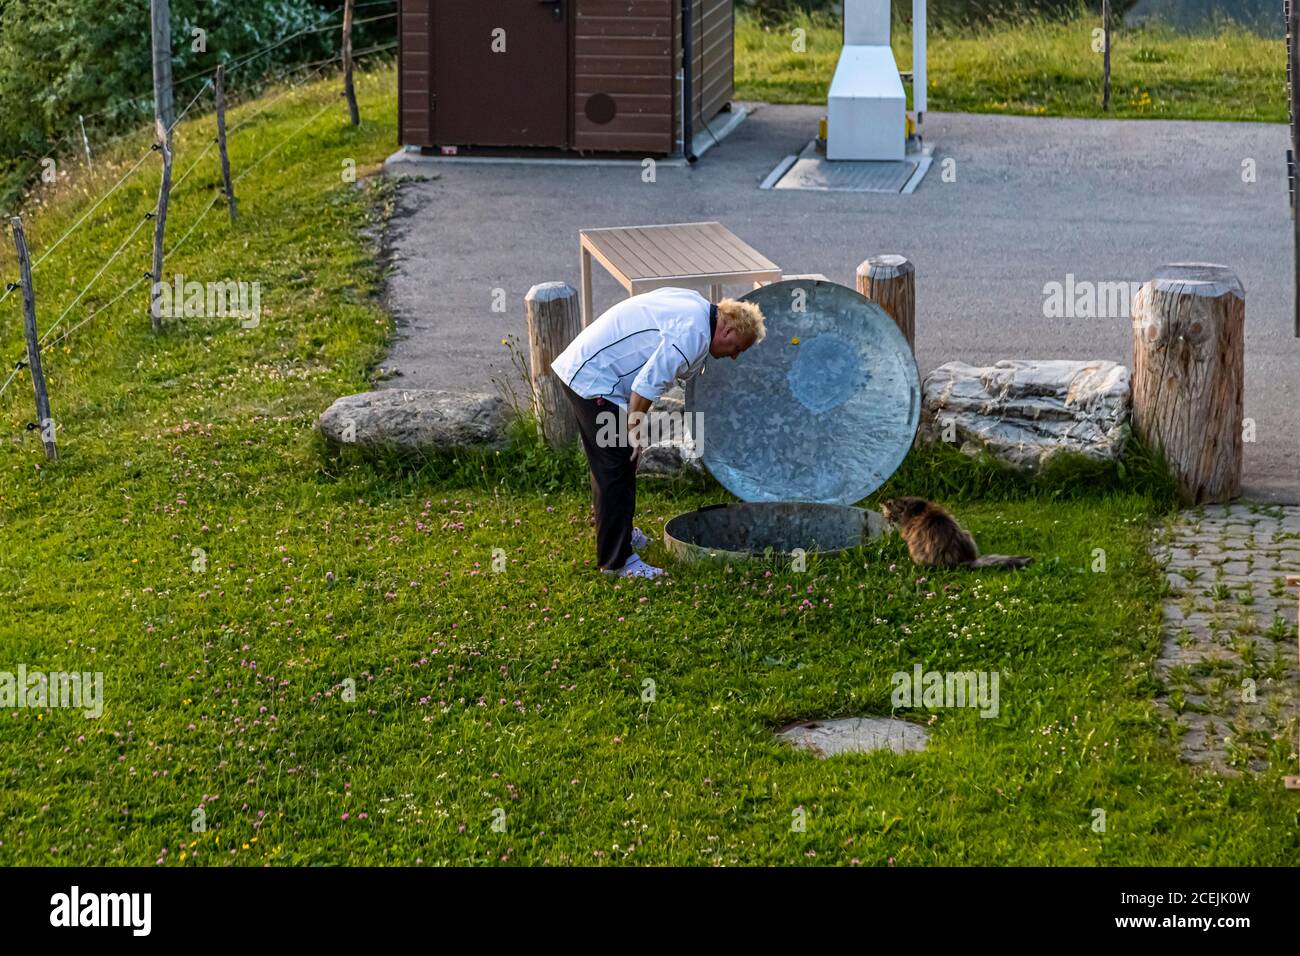 Gunter Steininger checks the underground pipe system and is assisted by his cat. He is chef of the mountain restaurant Bühlberg which is a dependence of Hotel Lenkerhof, Lenk, Switzerland Stock Photo